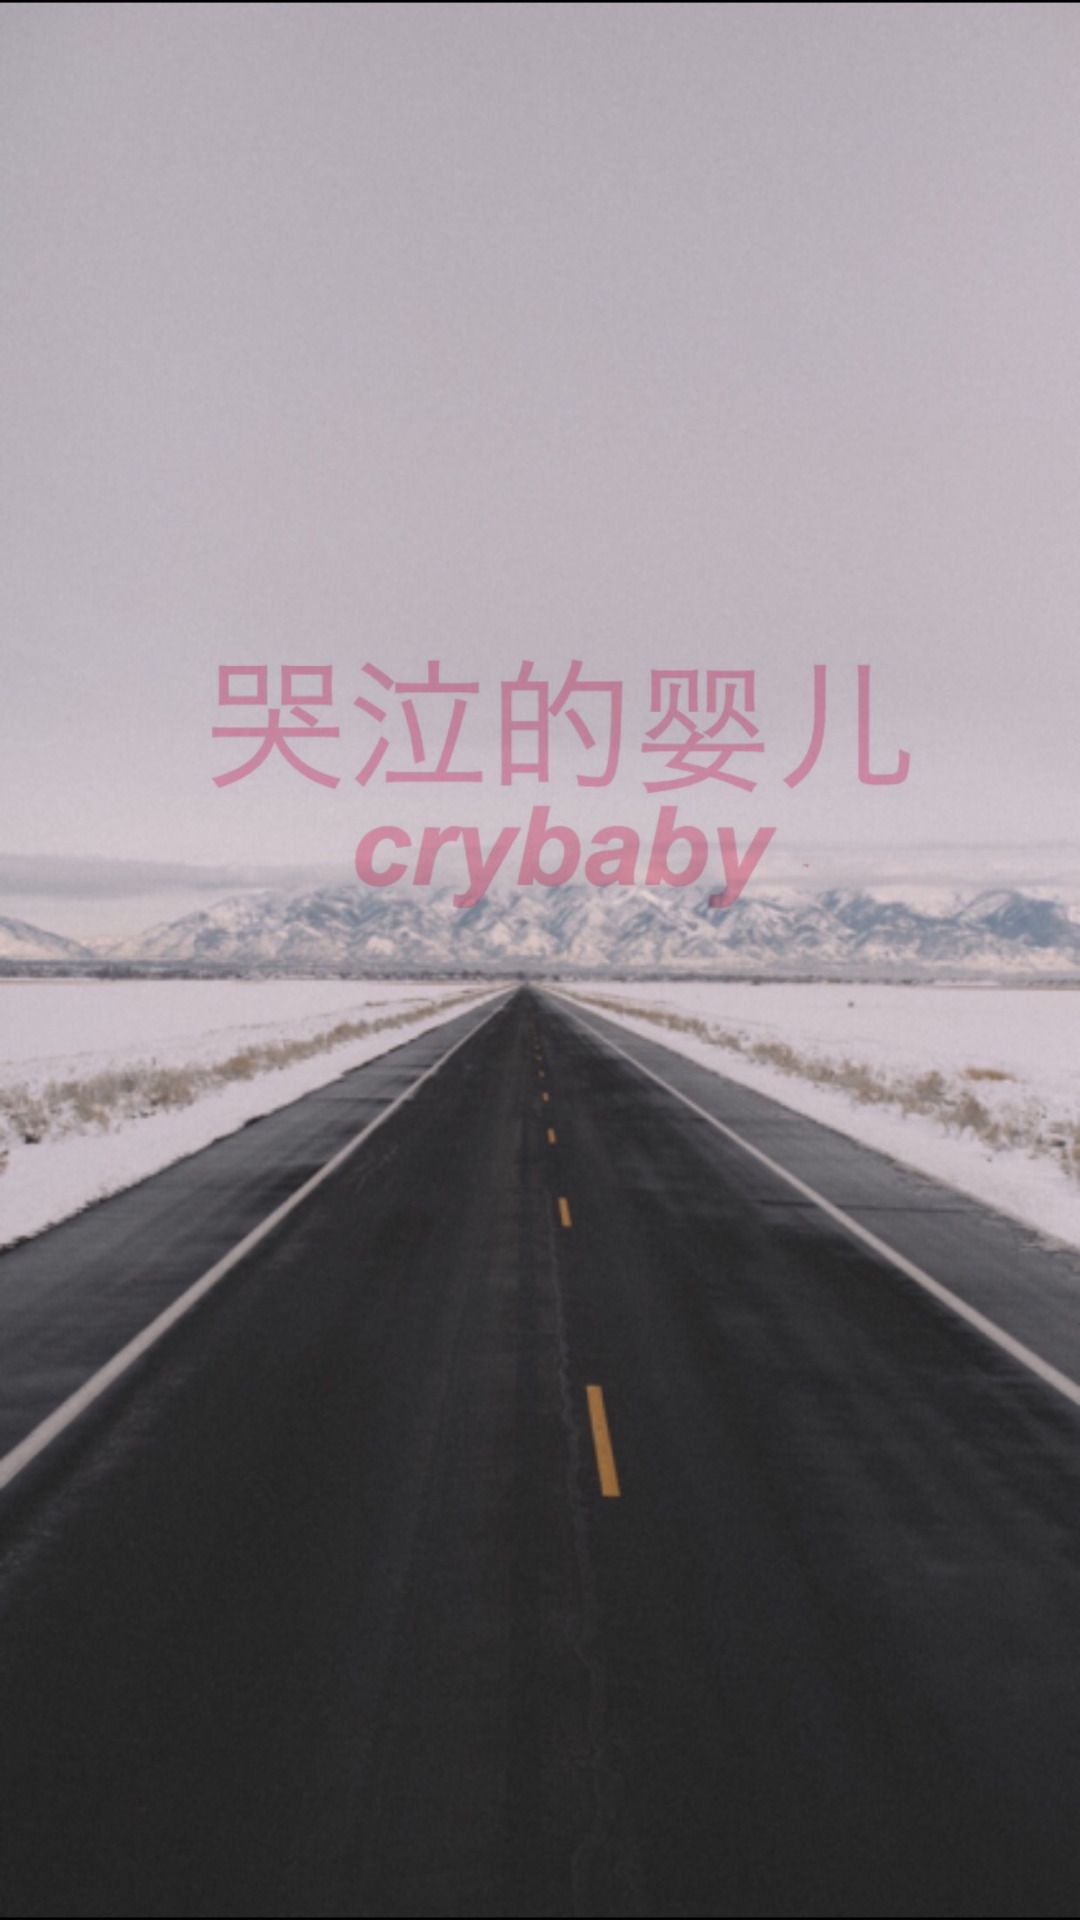 A road in winter with the words '哭泣的婴儿 crybaby' in pink. - Melanie Martinez